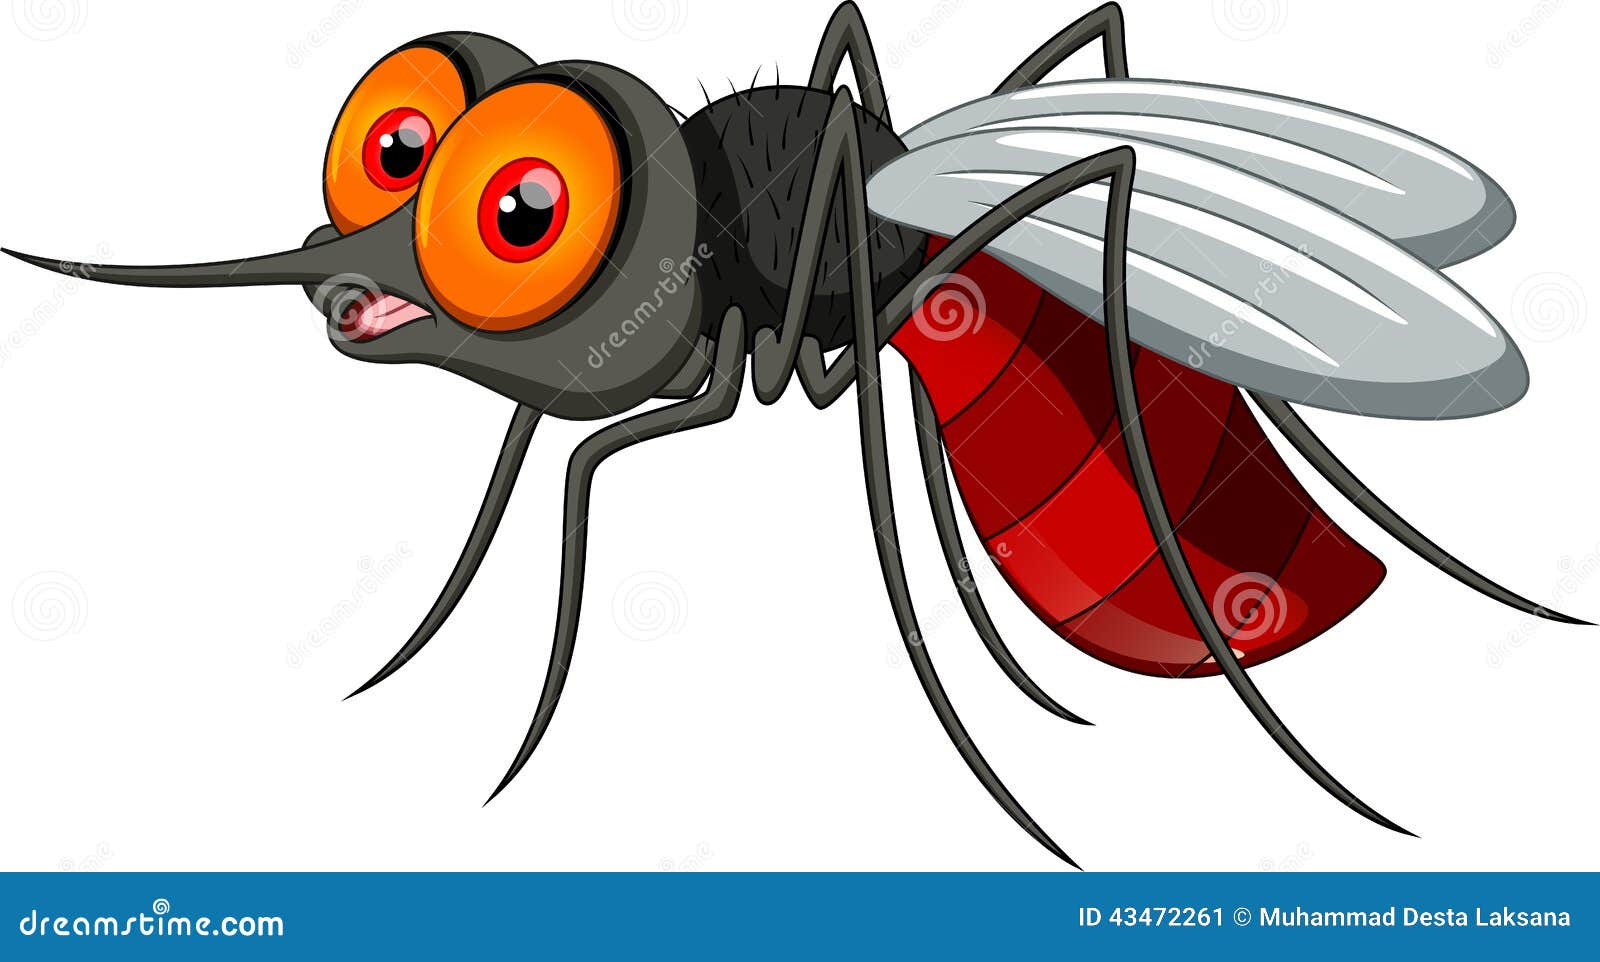 animated insect clipart - photo #45